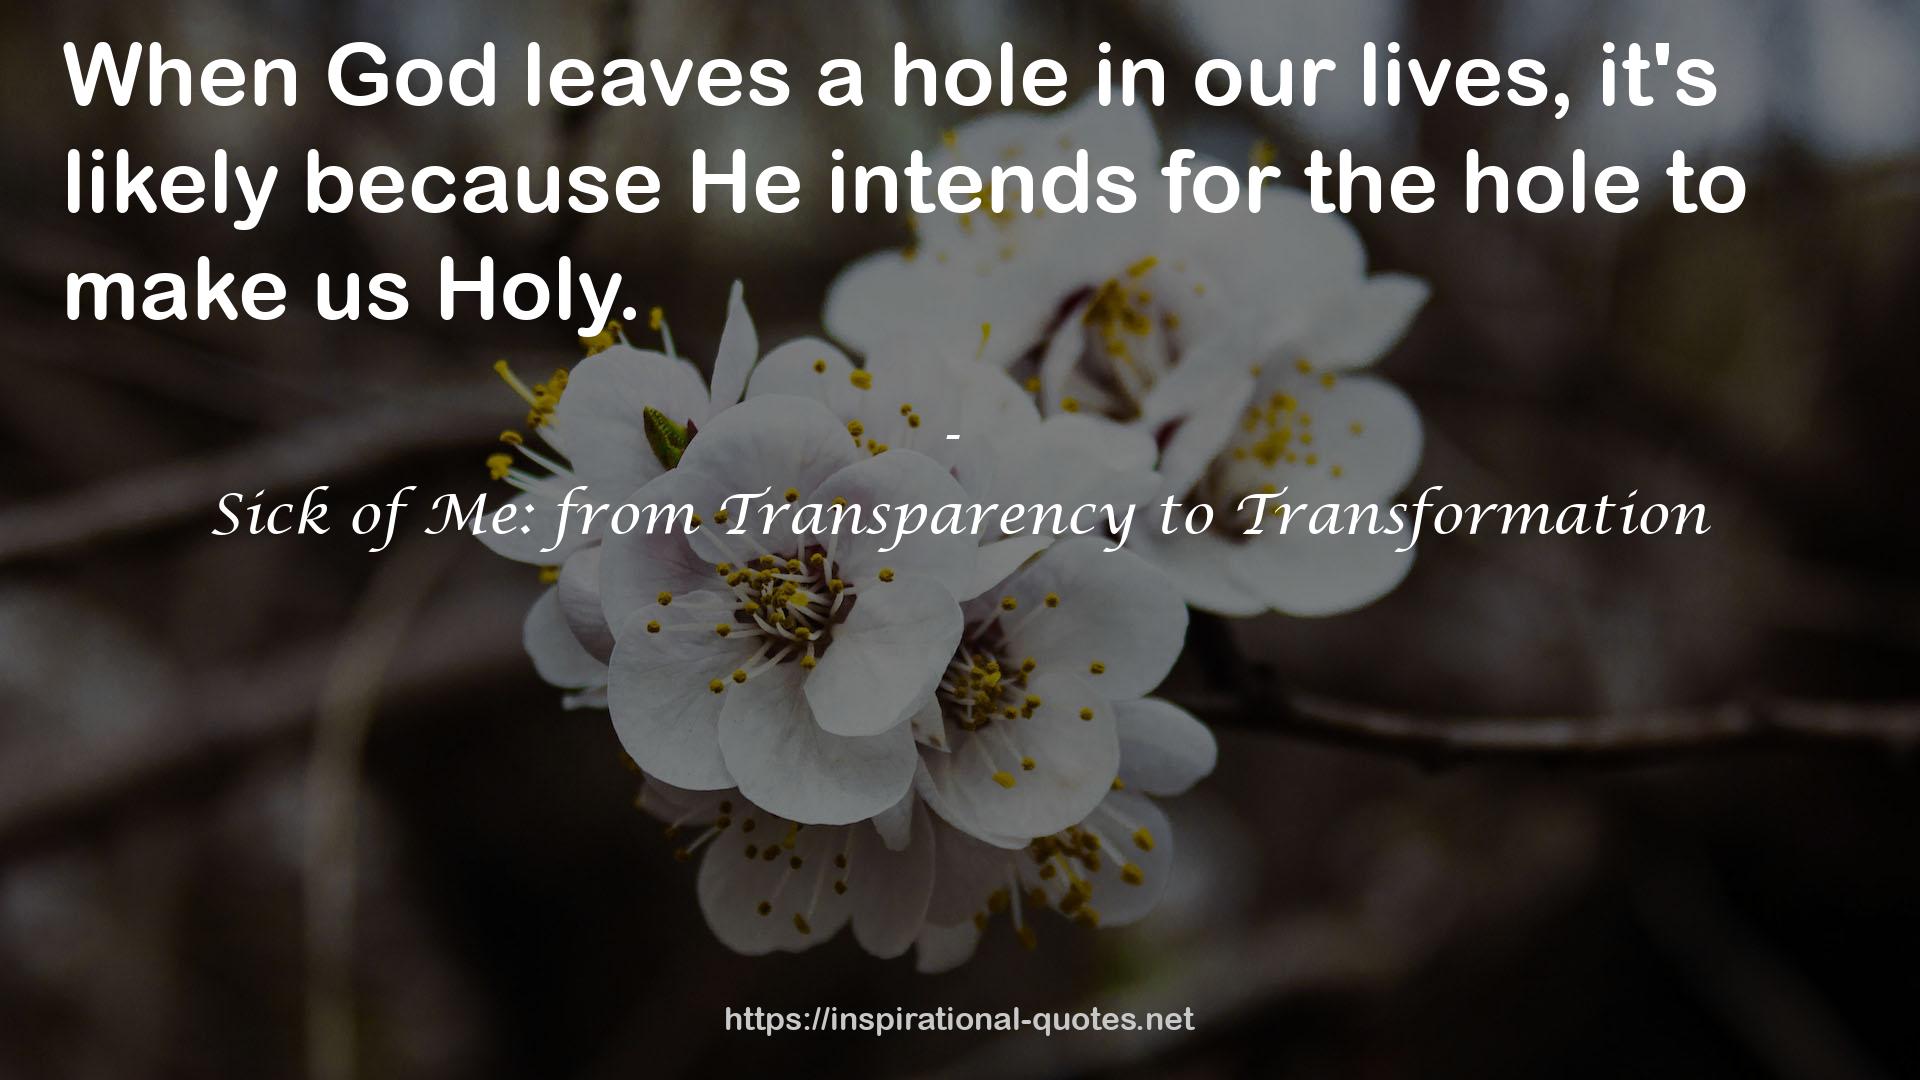 Sick of Me: from Transparency to Transformation QUOTES